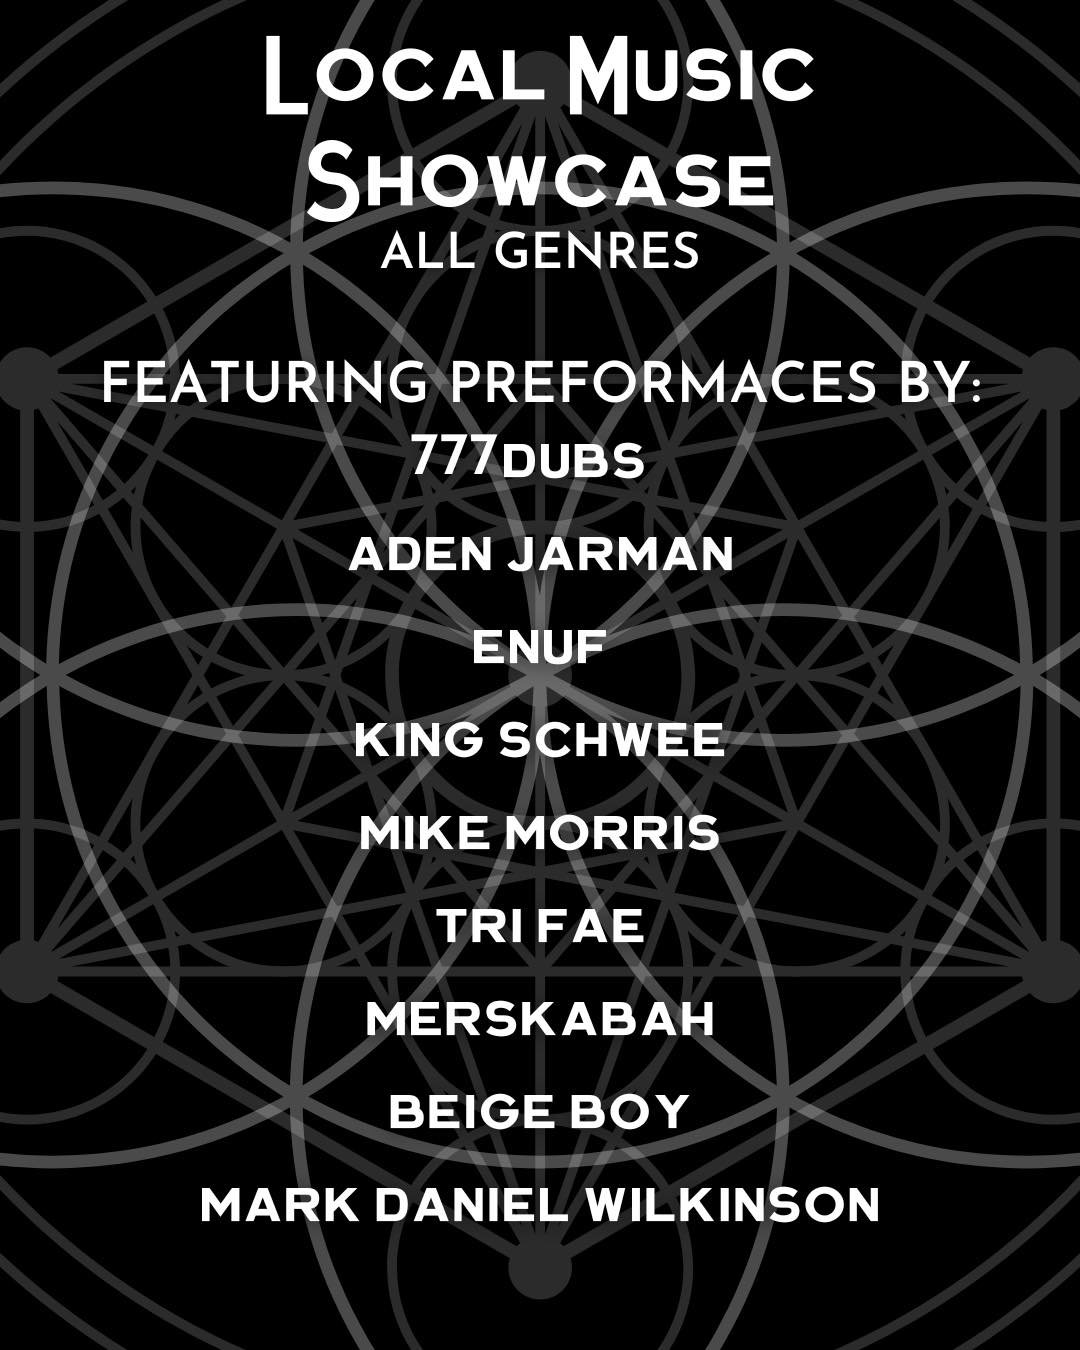 Excited for our upcoming Local Showcase All Genre night this Saturday? Feelings mutual.🤩 We will be featuring talent from: 777DUBS, Aden Jarman, ENUF, King Schwee, Mike Morris, tri fae, Merskabah, Beige Boy, Mark Daniel Wilkinson. Please note artist